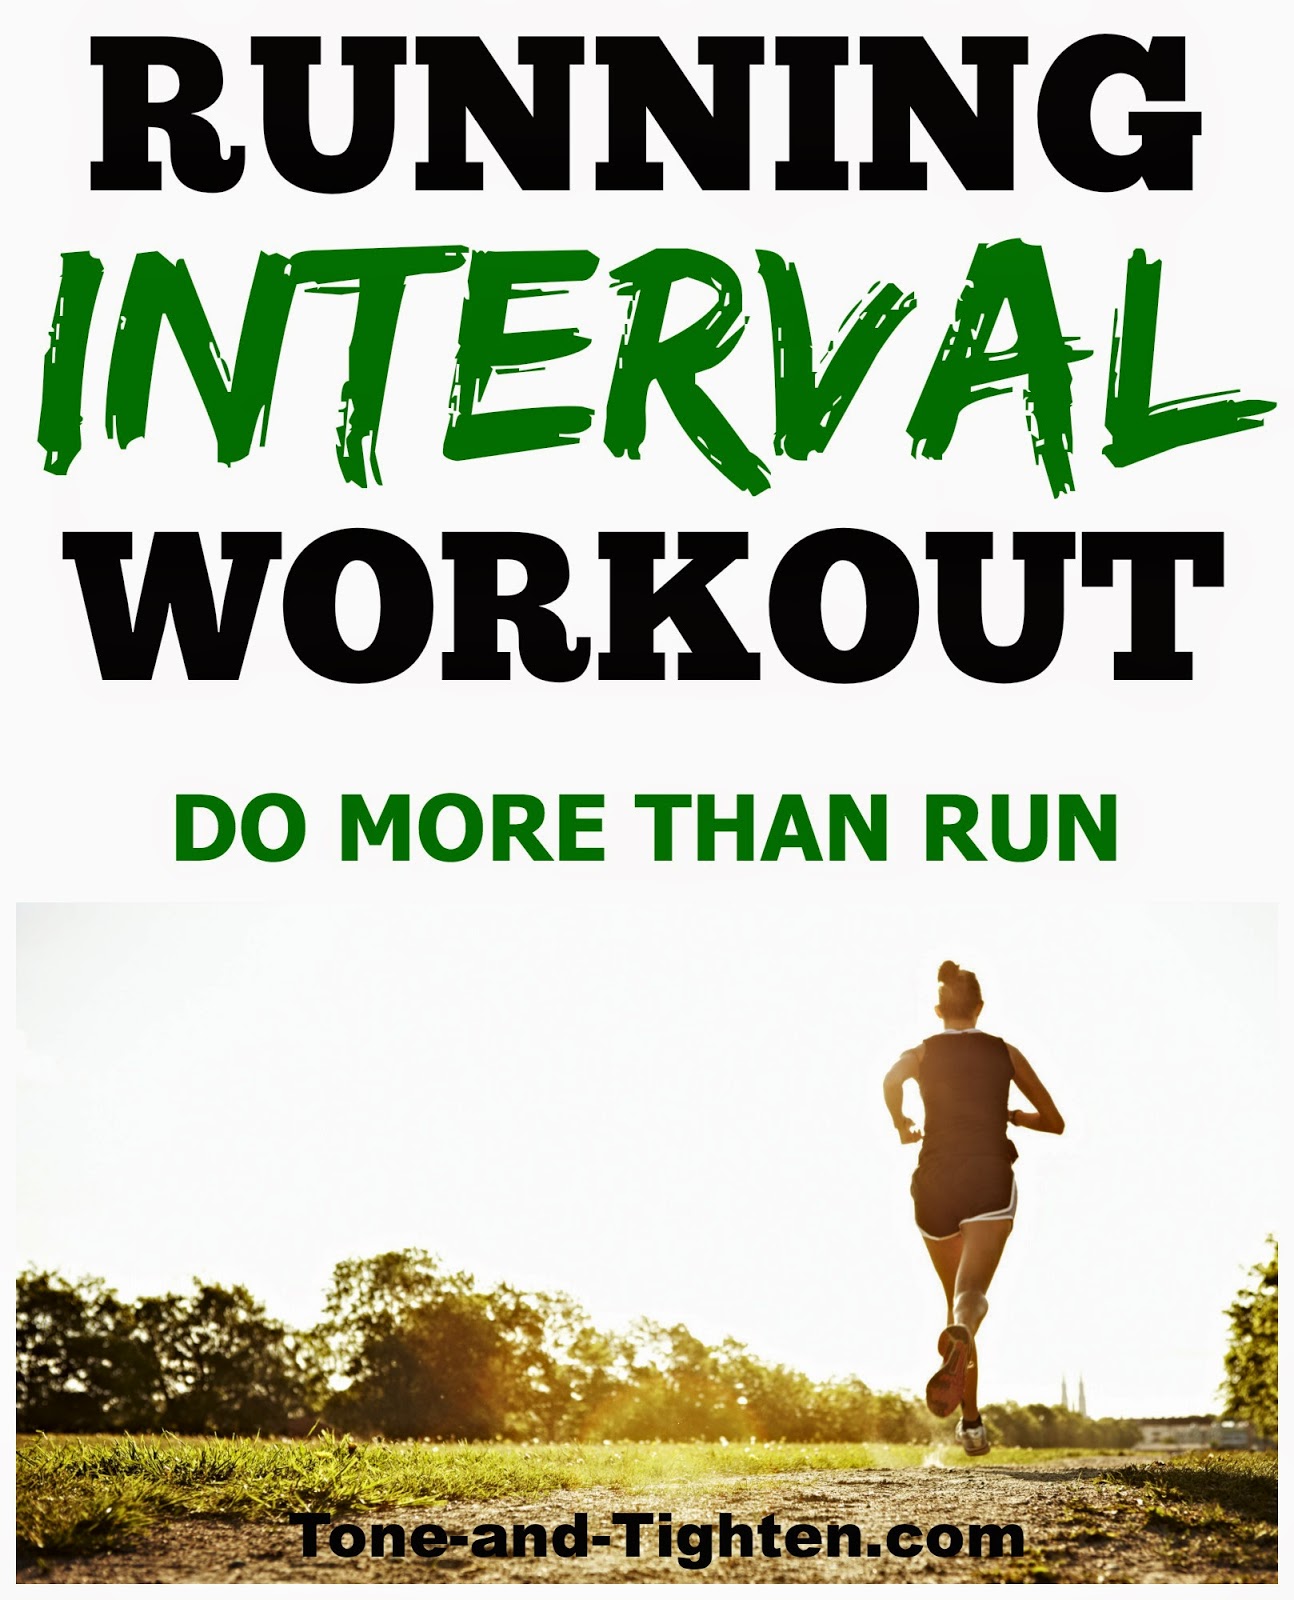 Running Interval Workout – Don’t just run… get your workout on while running!